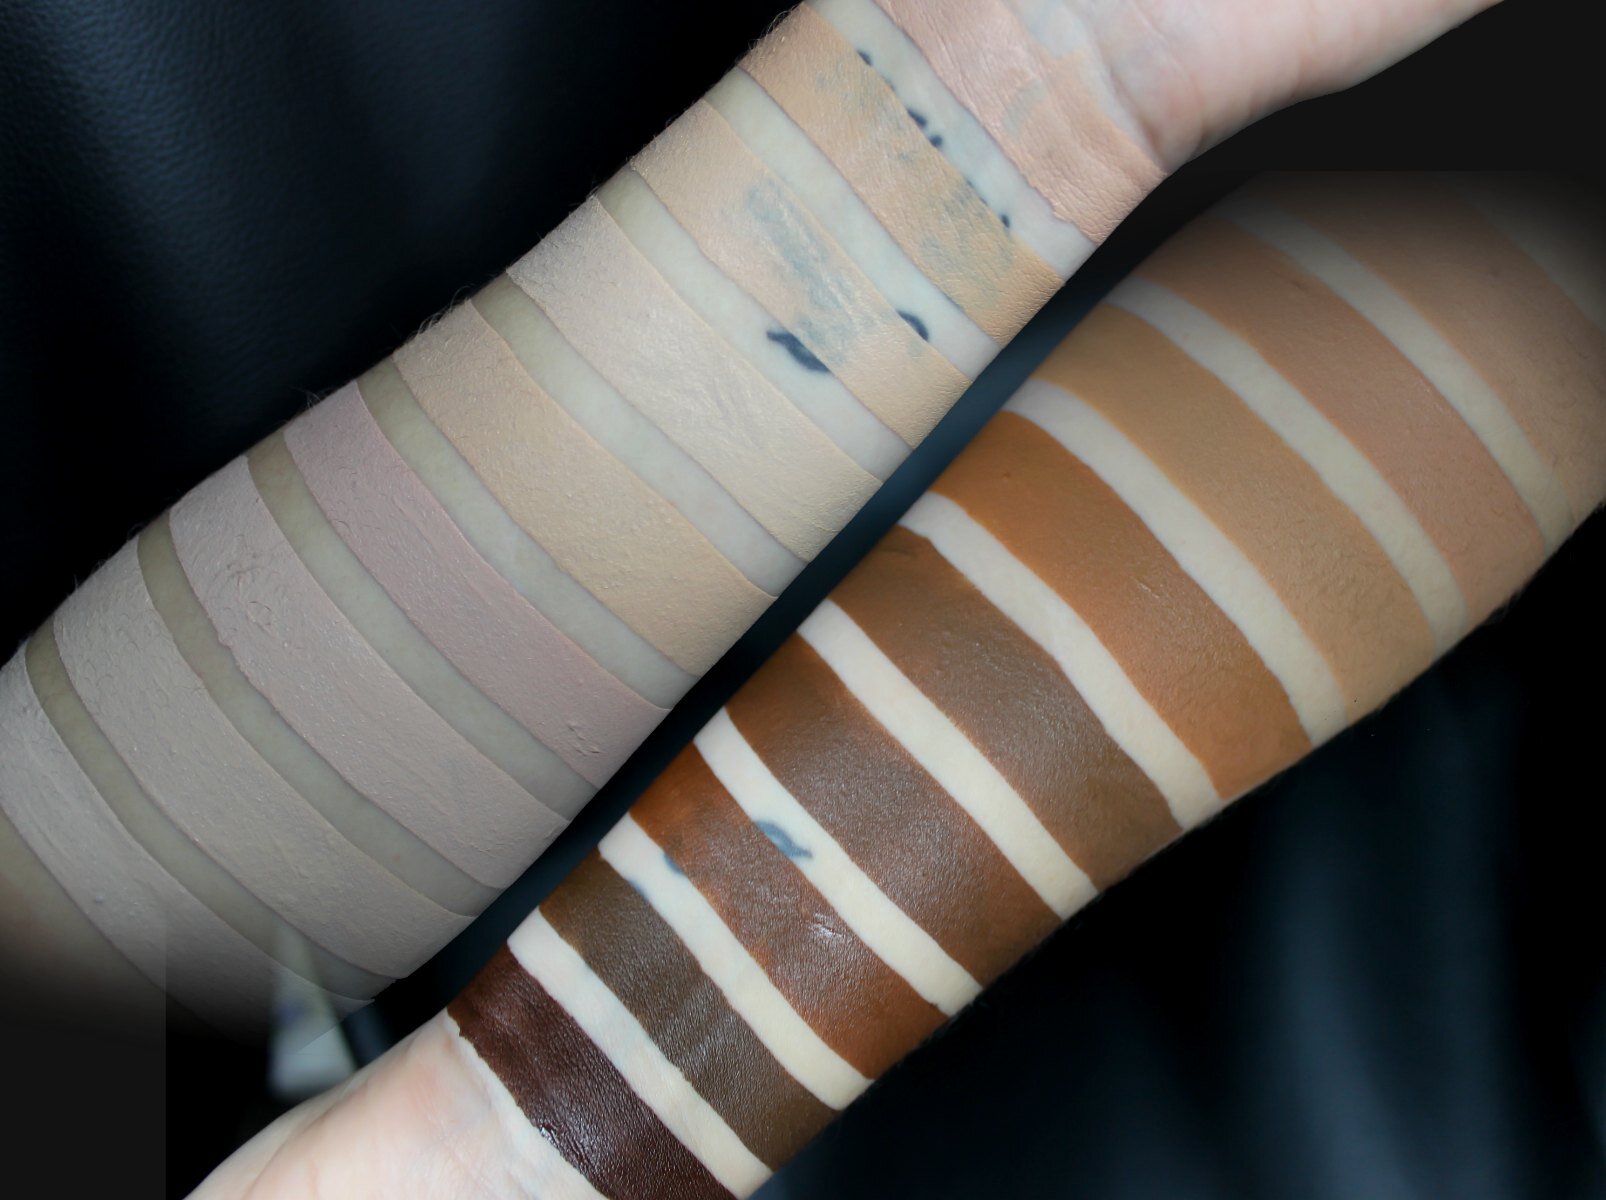 REVOLUTION CONCEAL AND DEFINE REVIEW SWATCHES